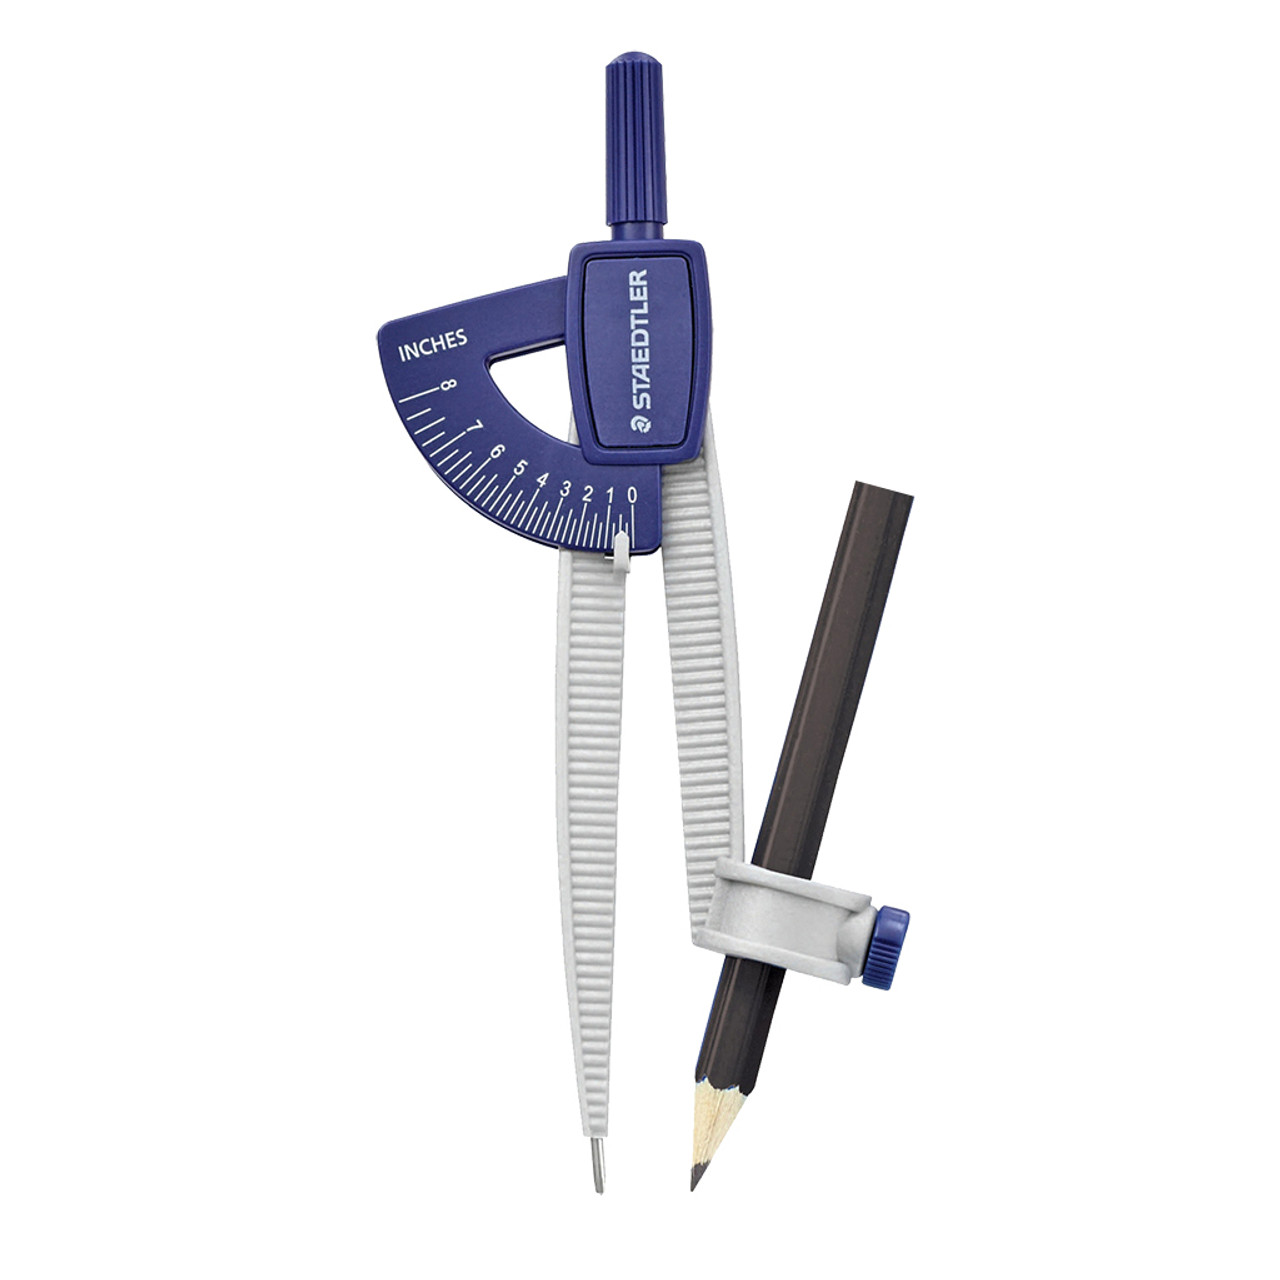 Staedtler Student Compass w/Pencil